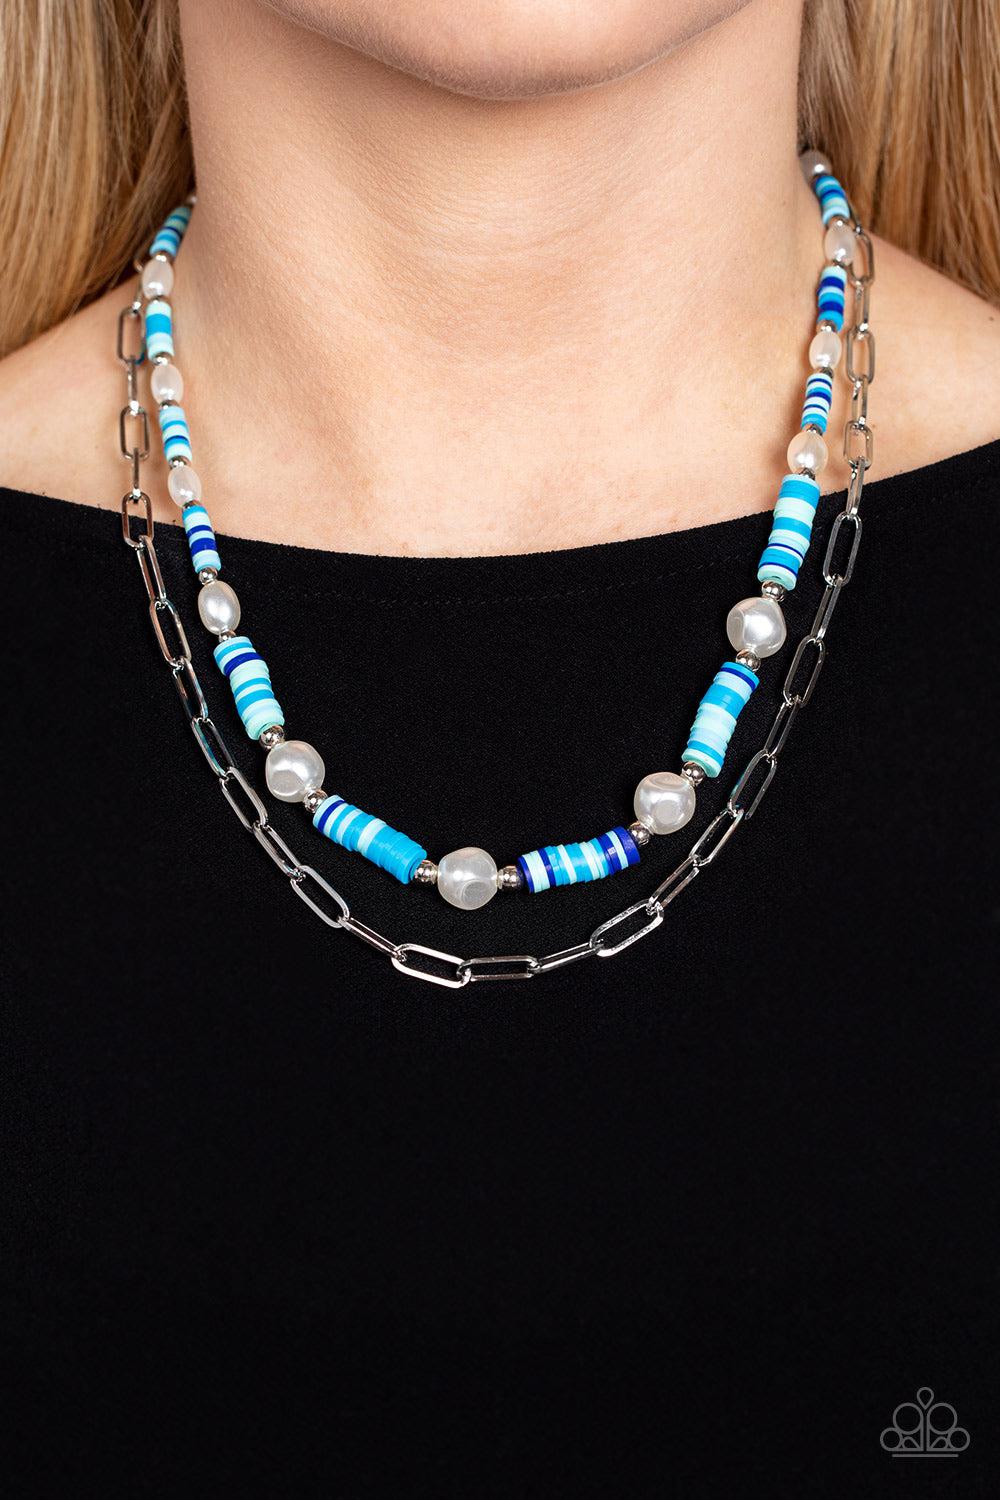 Tidal Trendsetter Blue Necklace - Paparazzi Accessories-on model - CarasShop.com - $5 Jewelry by Cara Jewels